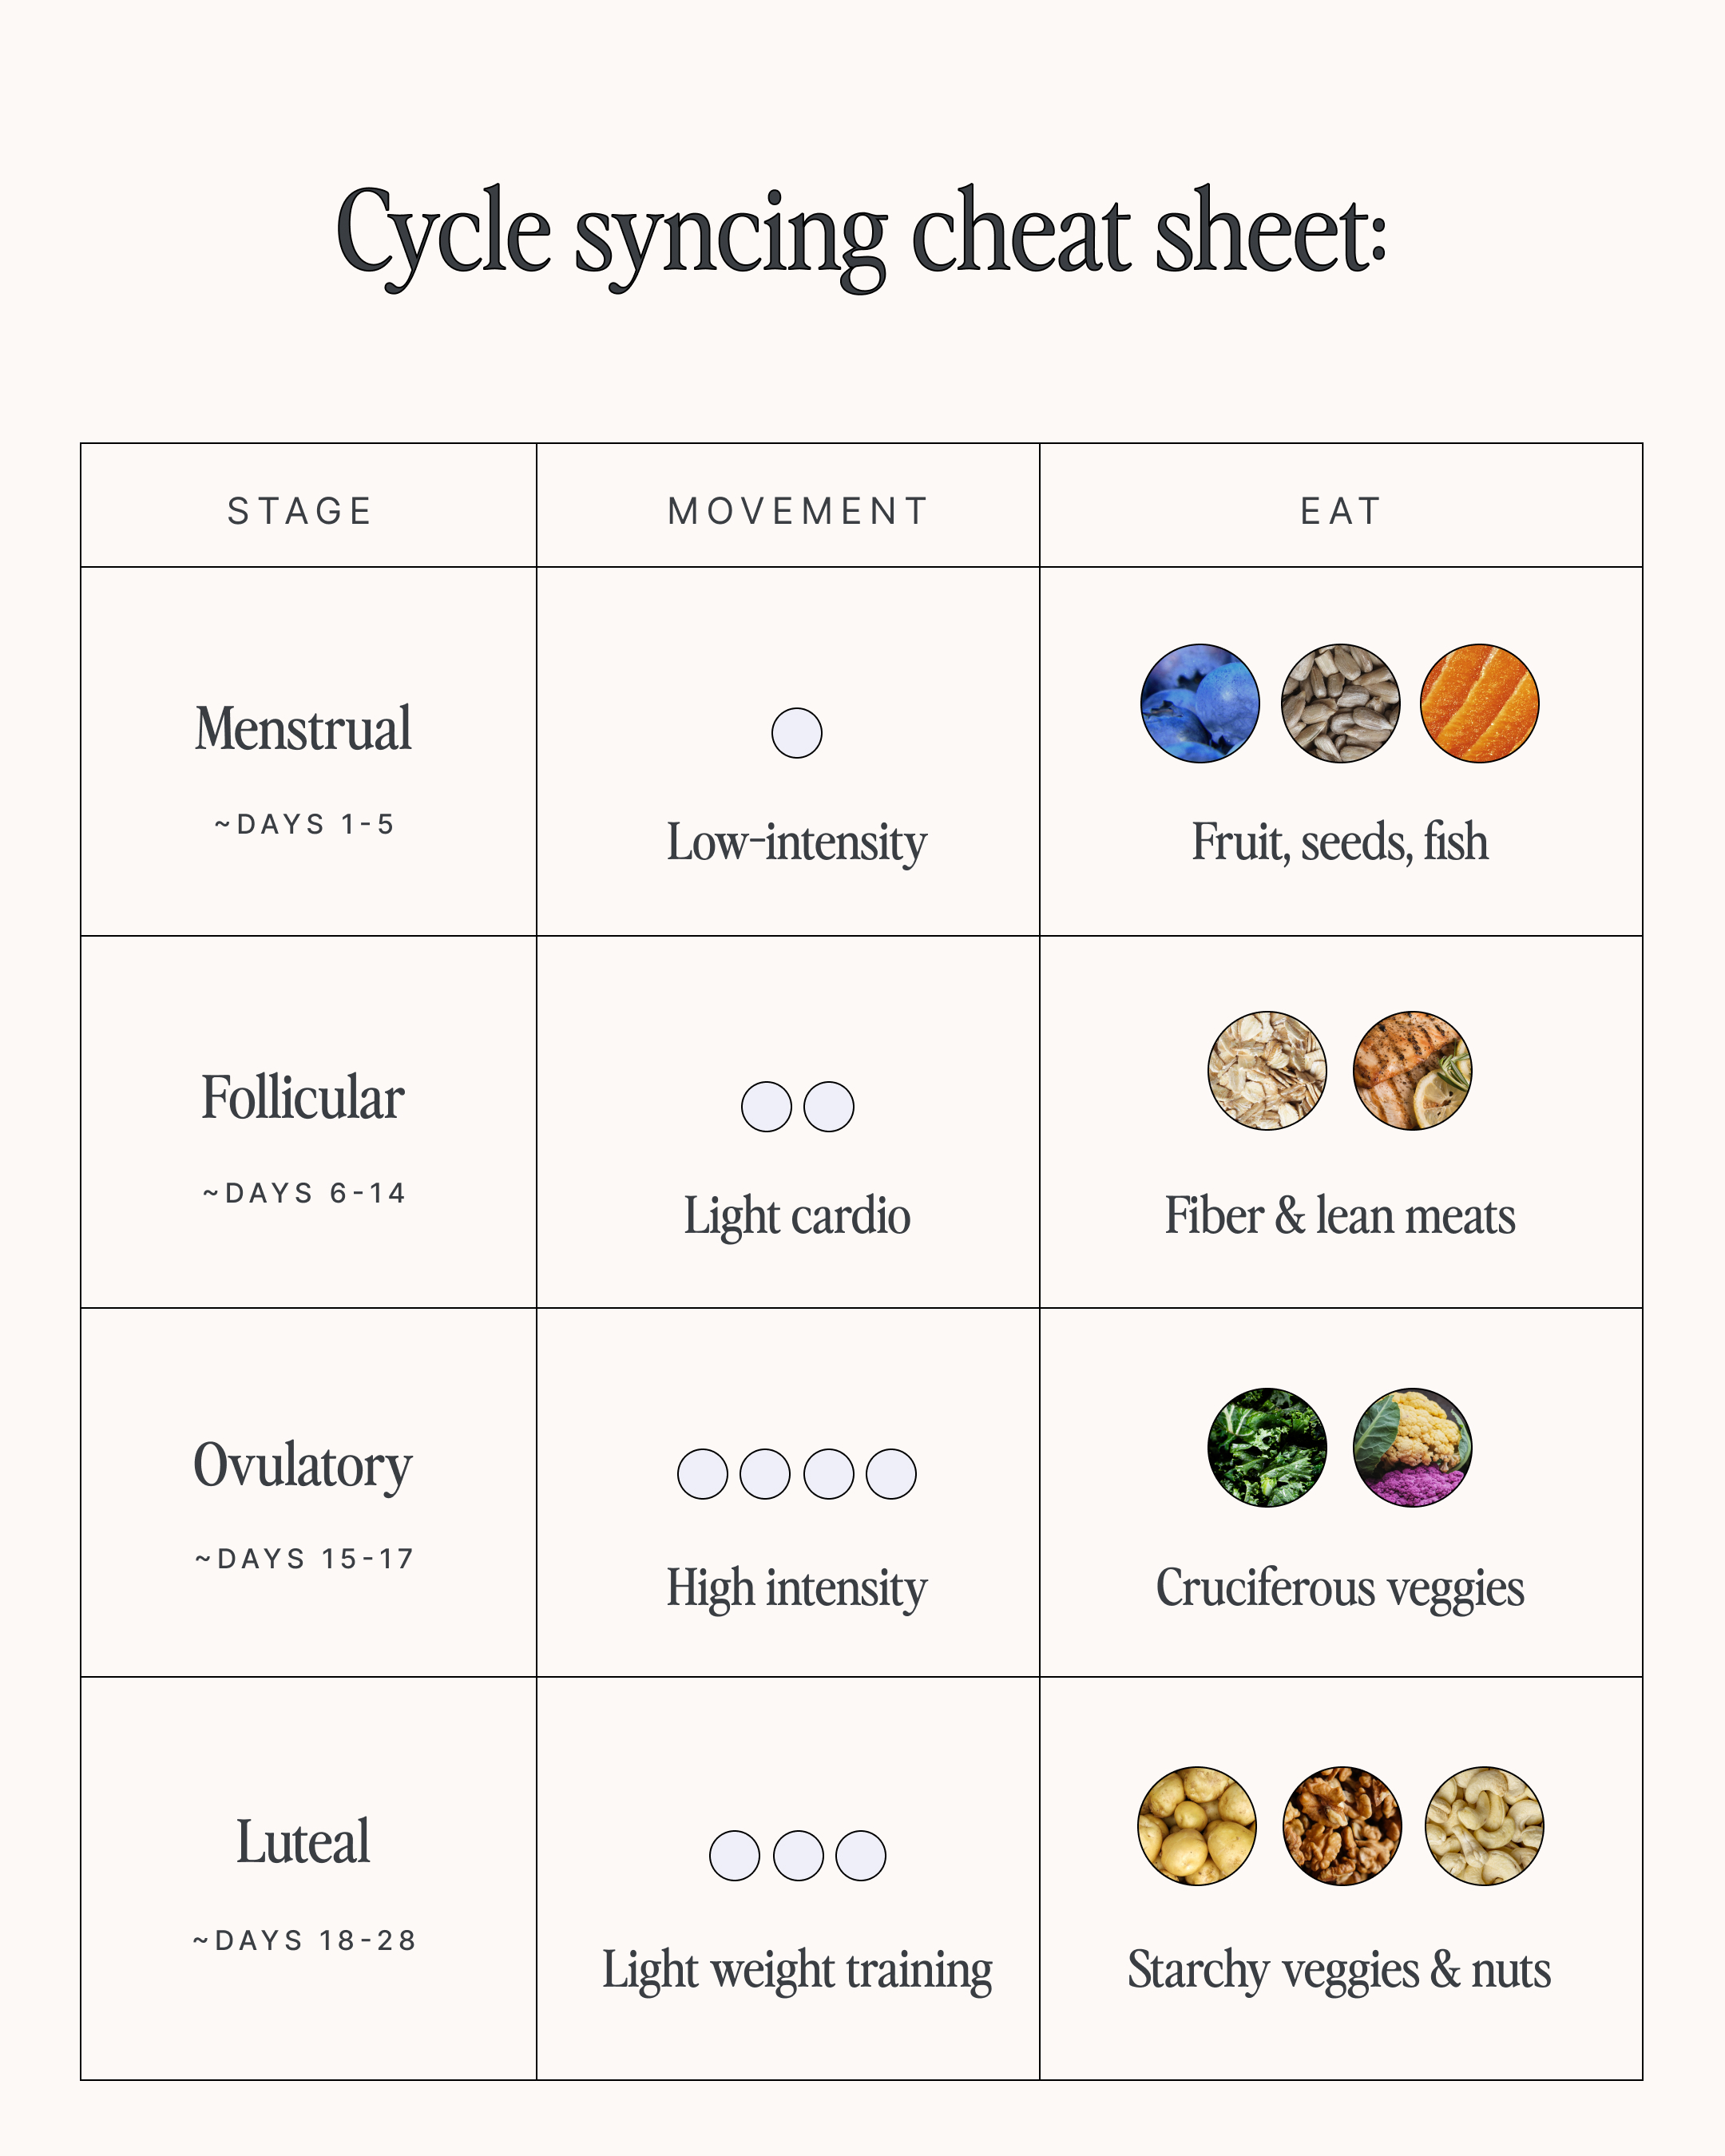 Cycle Syncing cheat sheet